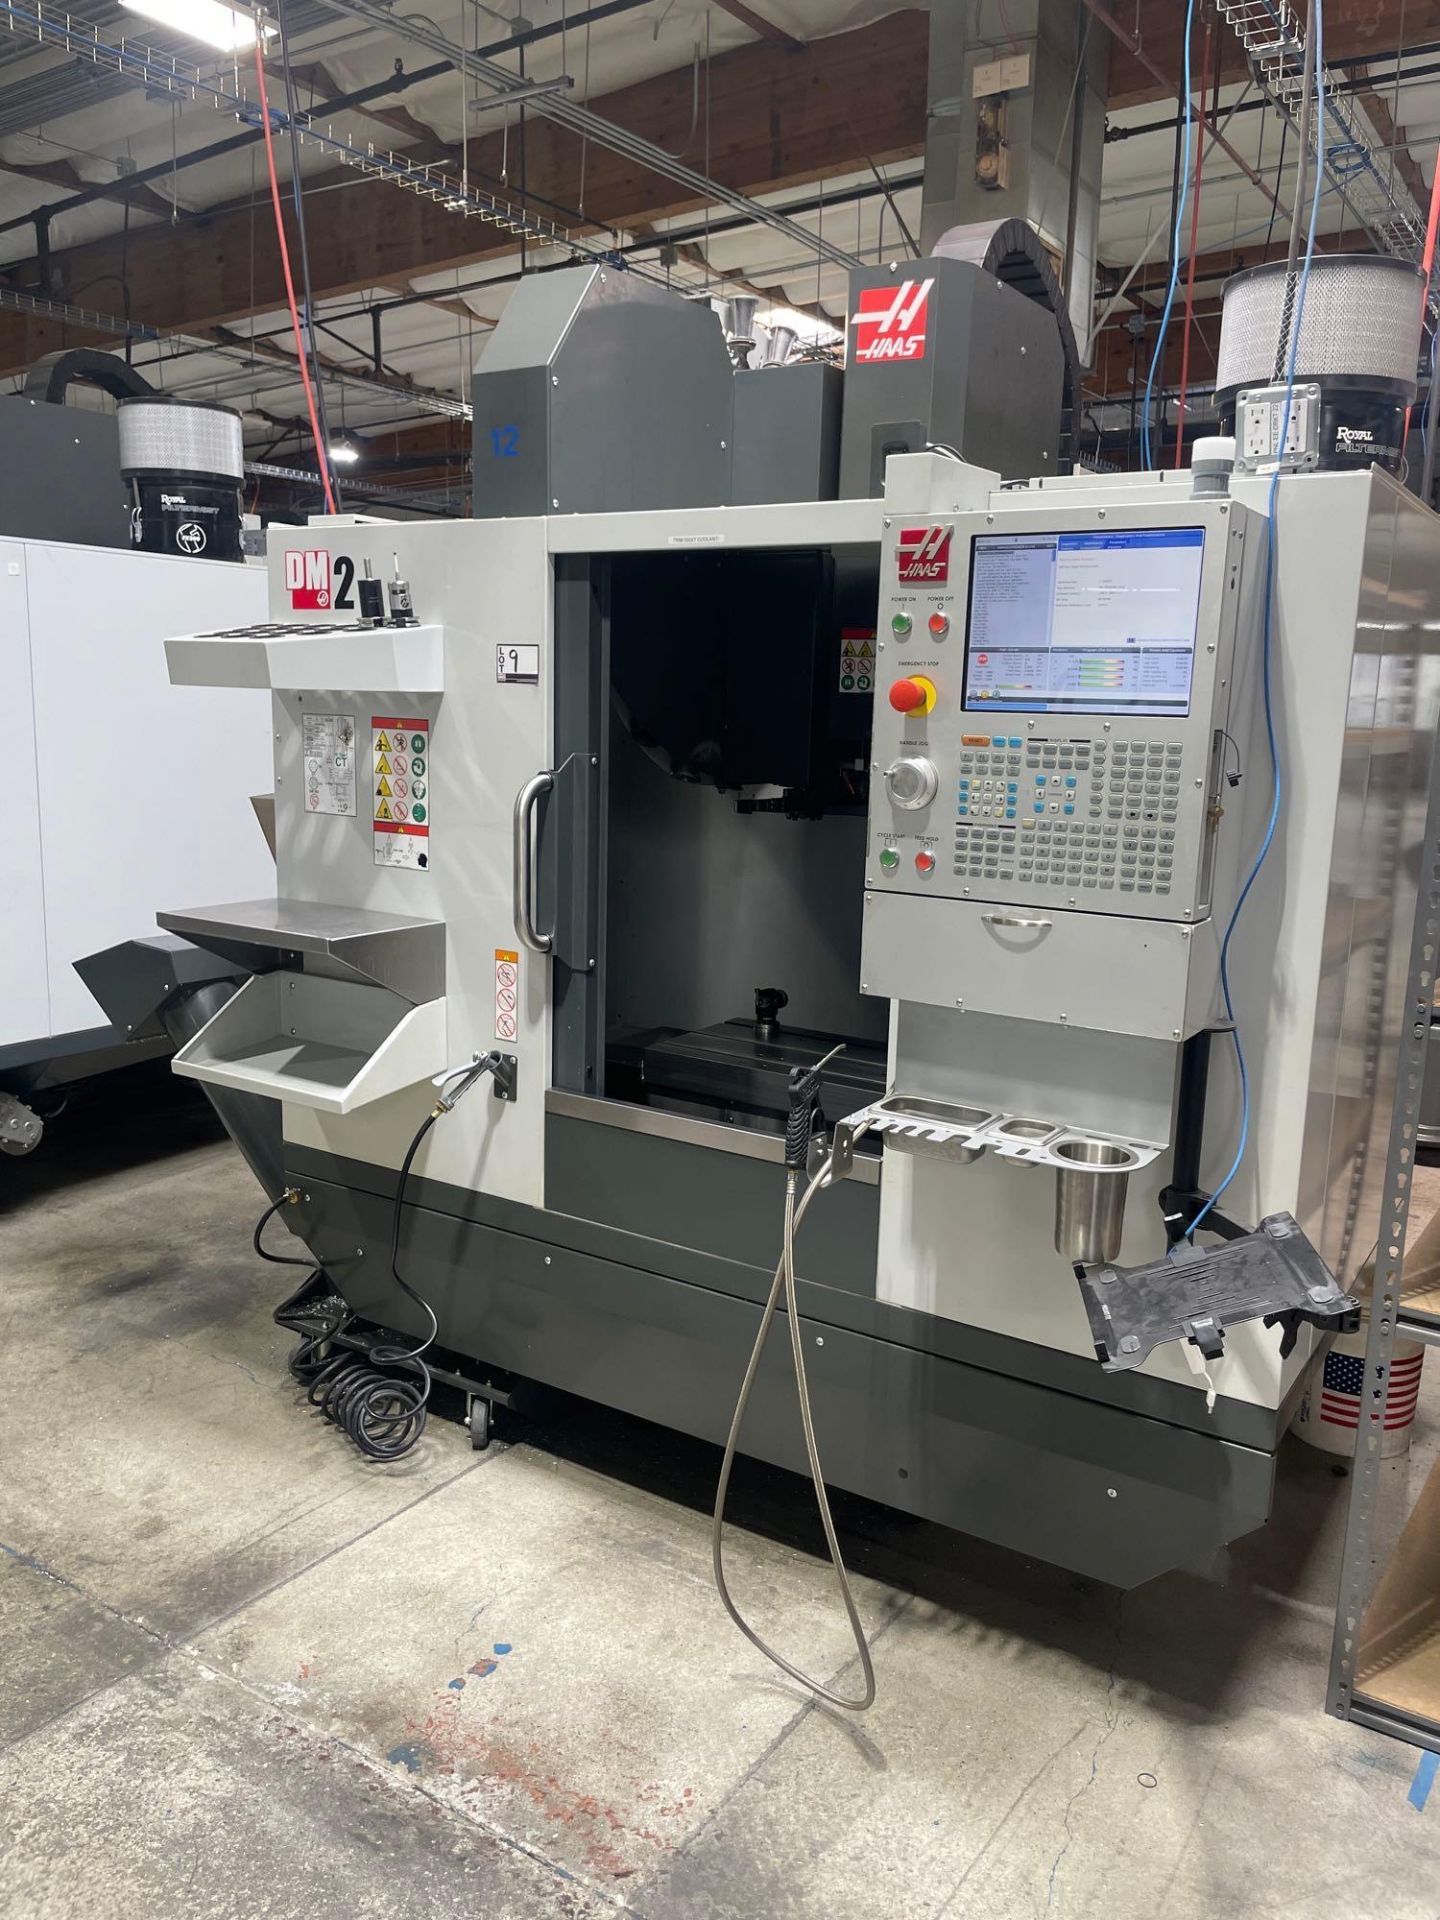 Haas DM-2, 28” x 16” x 15.5” Travels, CT 40, 18+1 SMTC, CTS, WIPS, as New as 2021 - Image 3 of 10